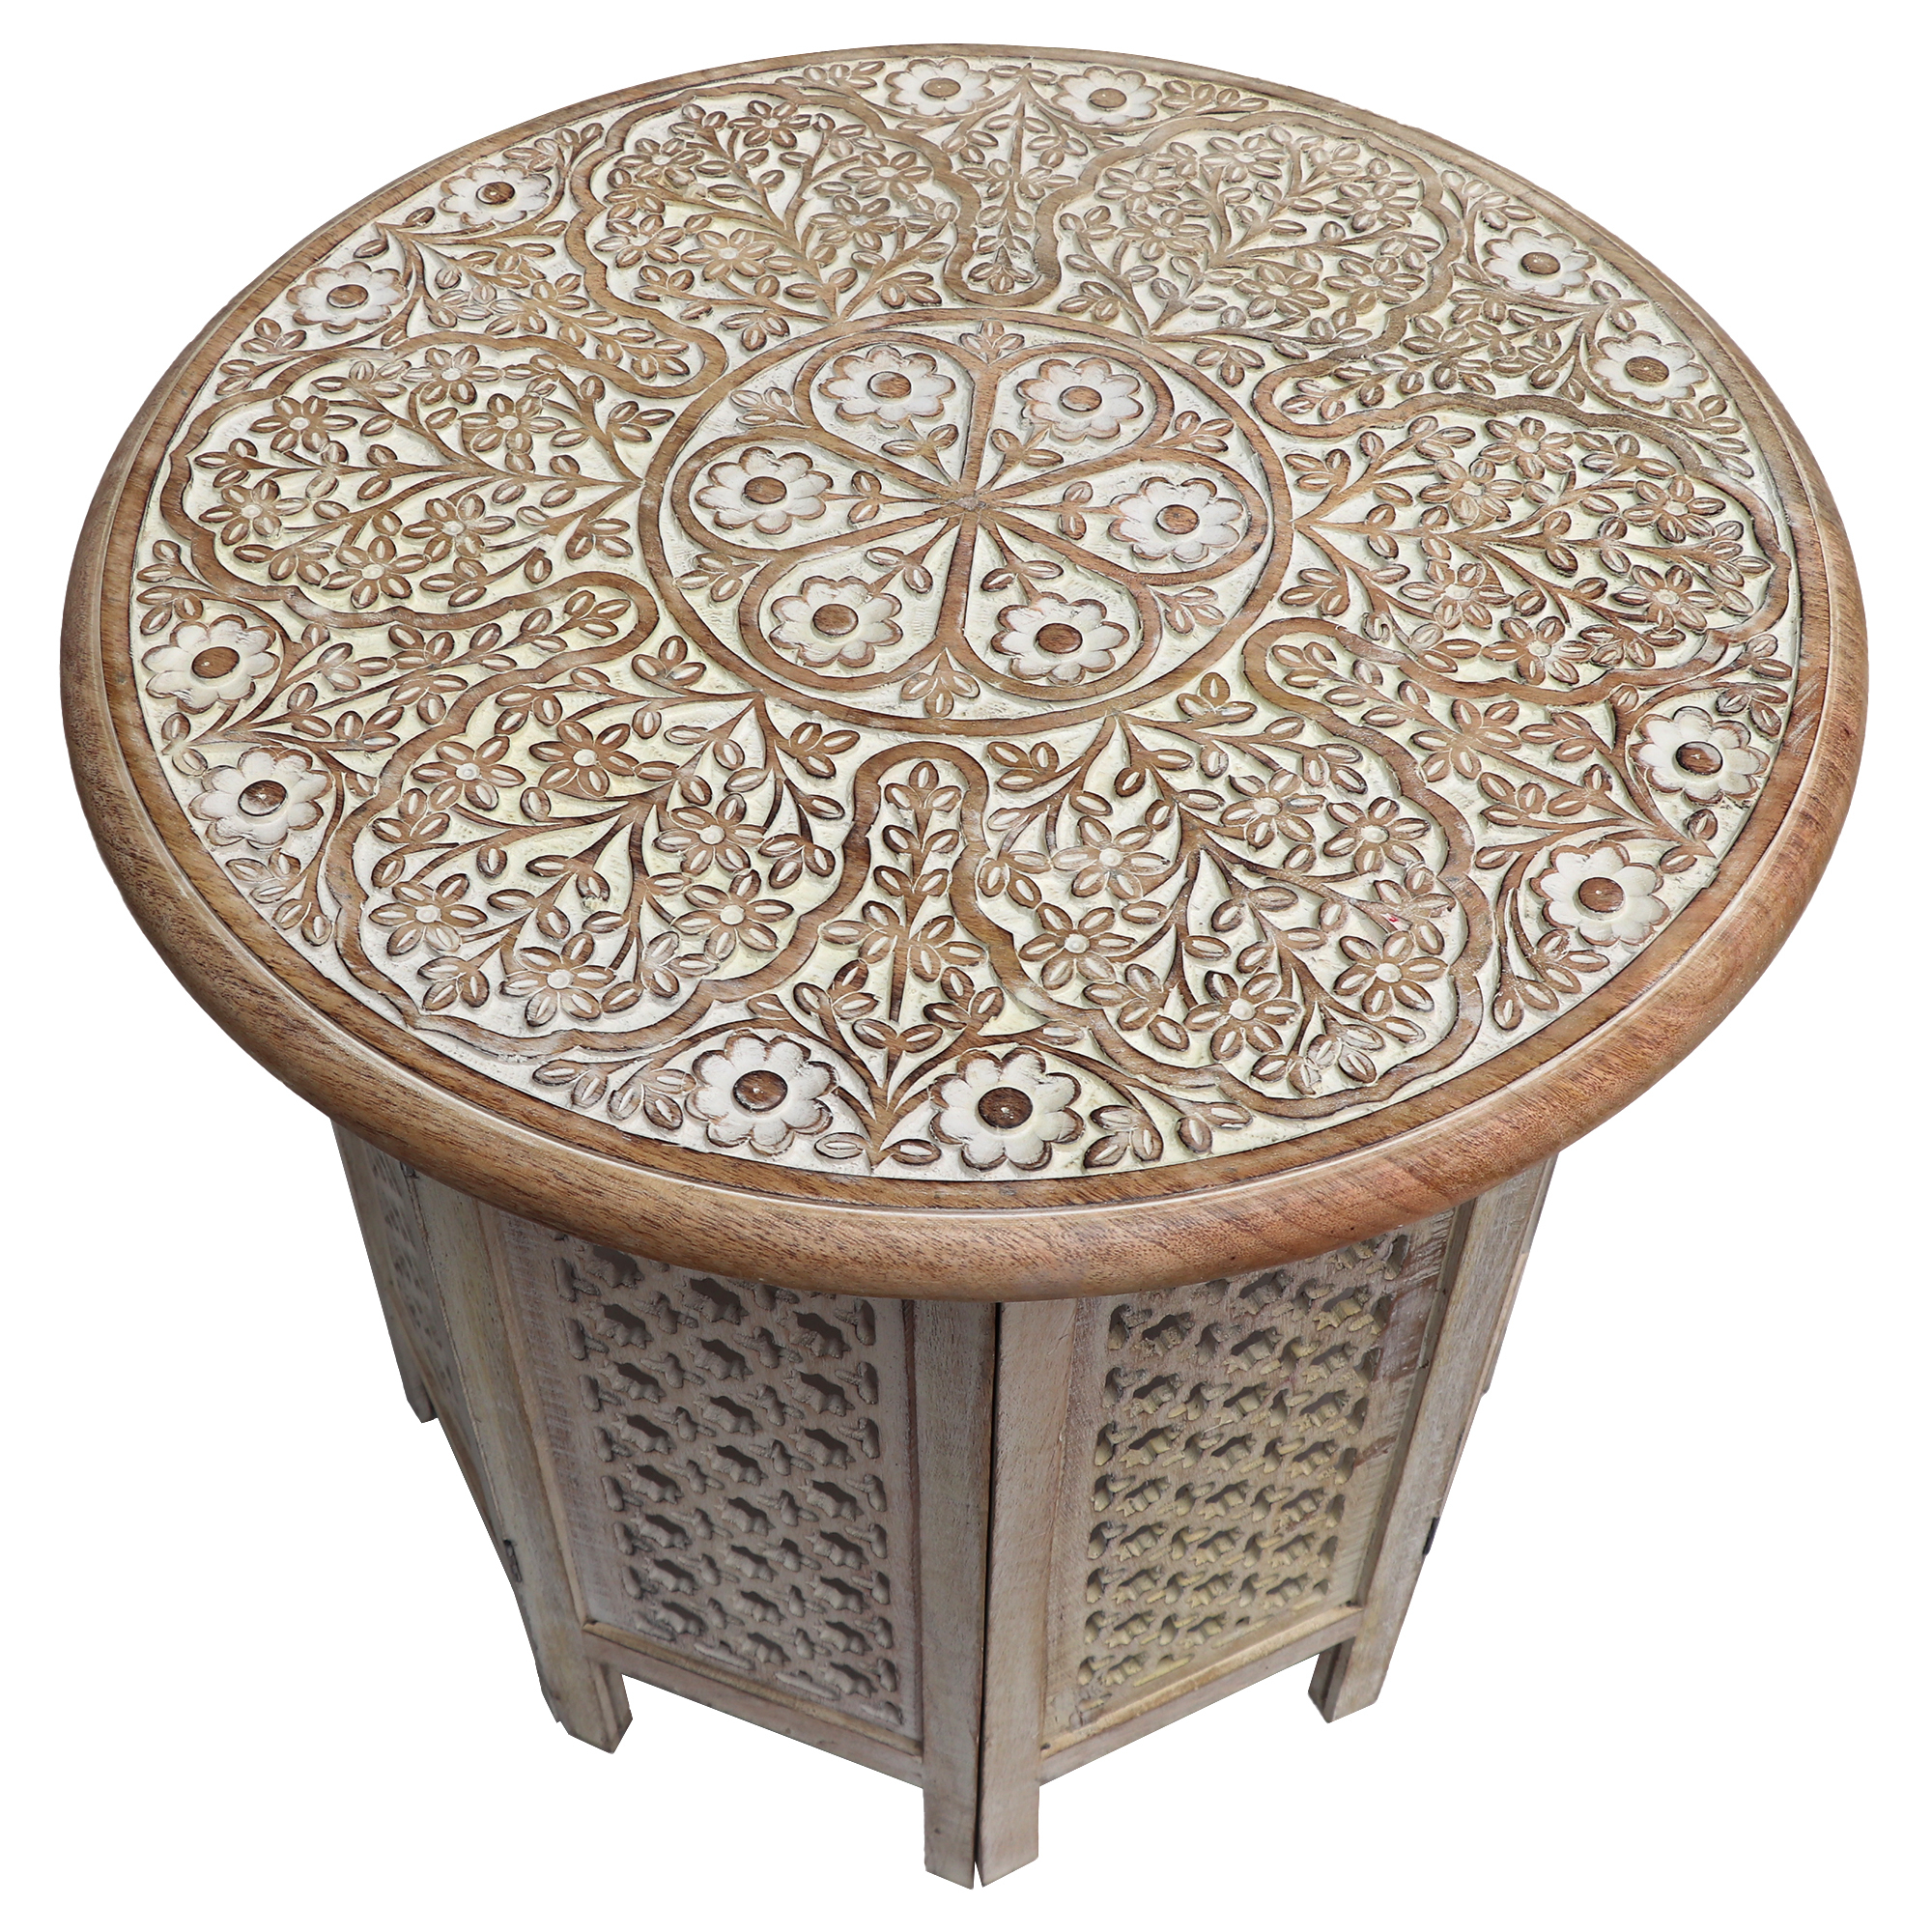 Mesh Cut Out Carved Mango Wood Octagonal Folding Table With Round Top, Antique White And Brown- Saltoro Sherpi